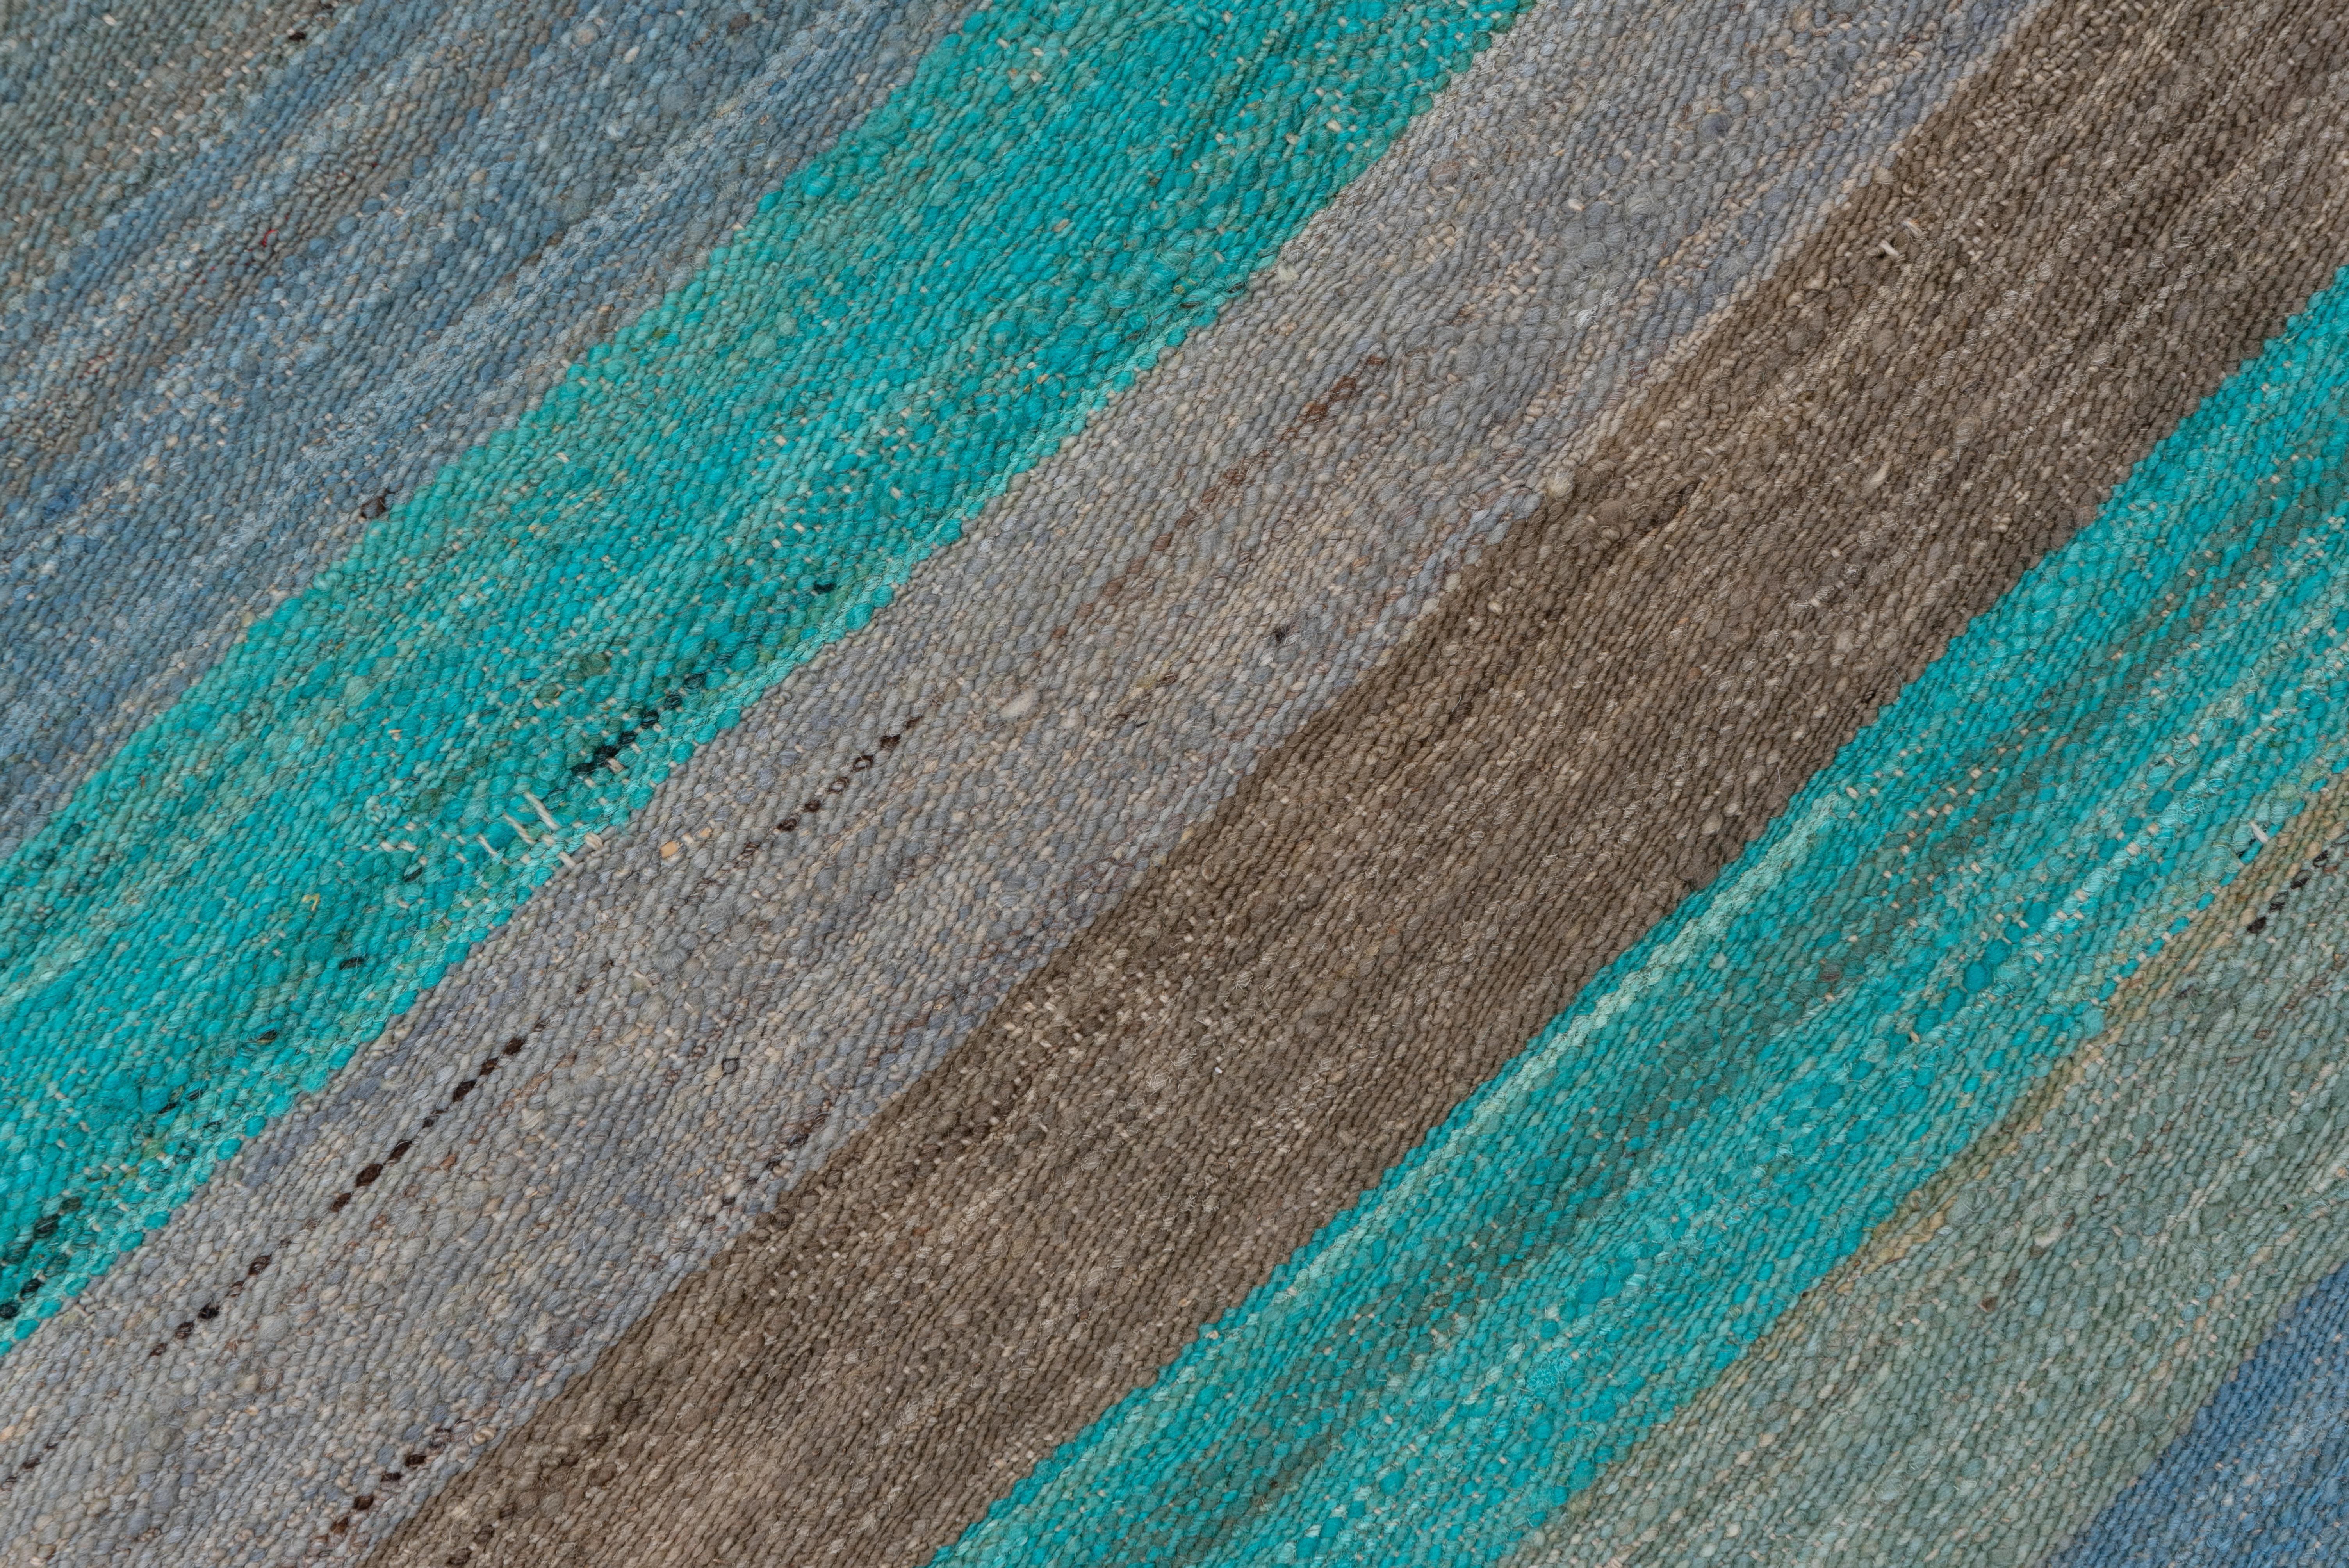 Contemporary Striped Flatweave Area Rug, Blue, Light Sea Green & Brown Tones In Excellent Condition For Sale In New York, NY